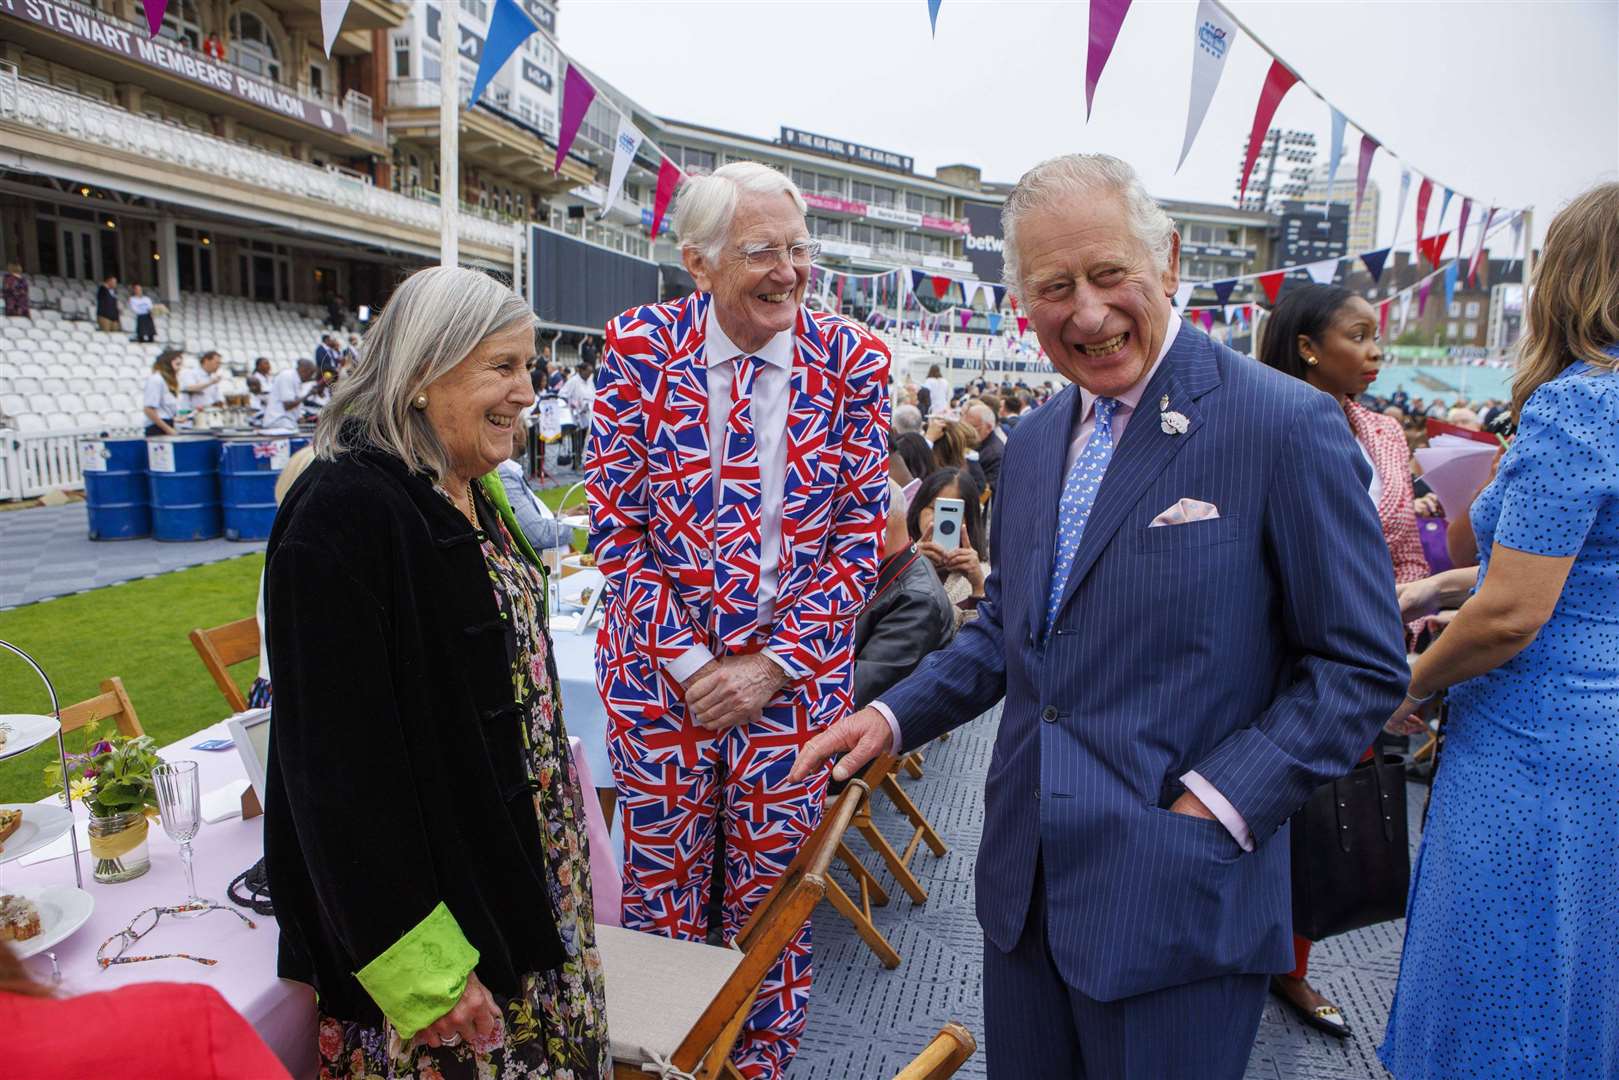 The Prince of Wales meets partygoers (Jamie Lorriman/Daily Telegraph/PA)